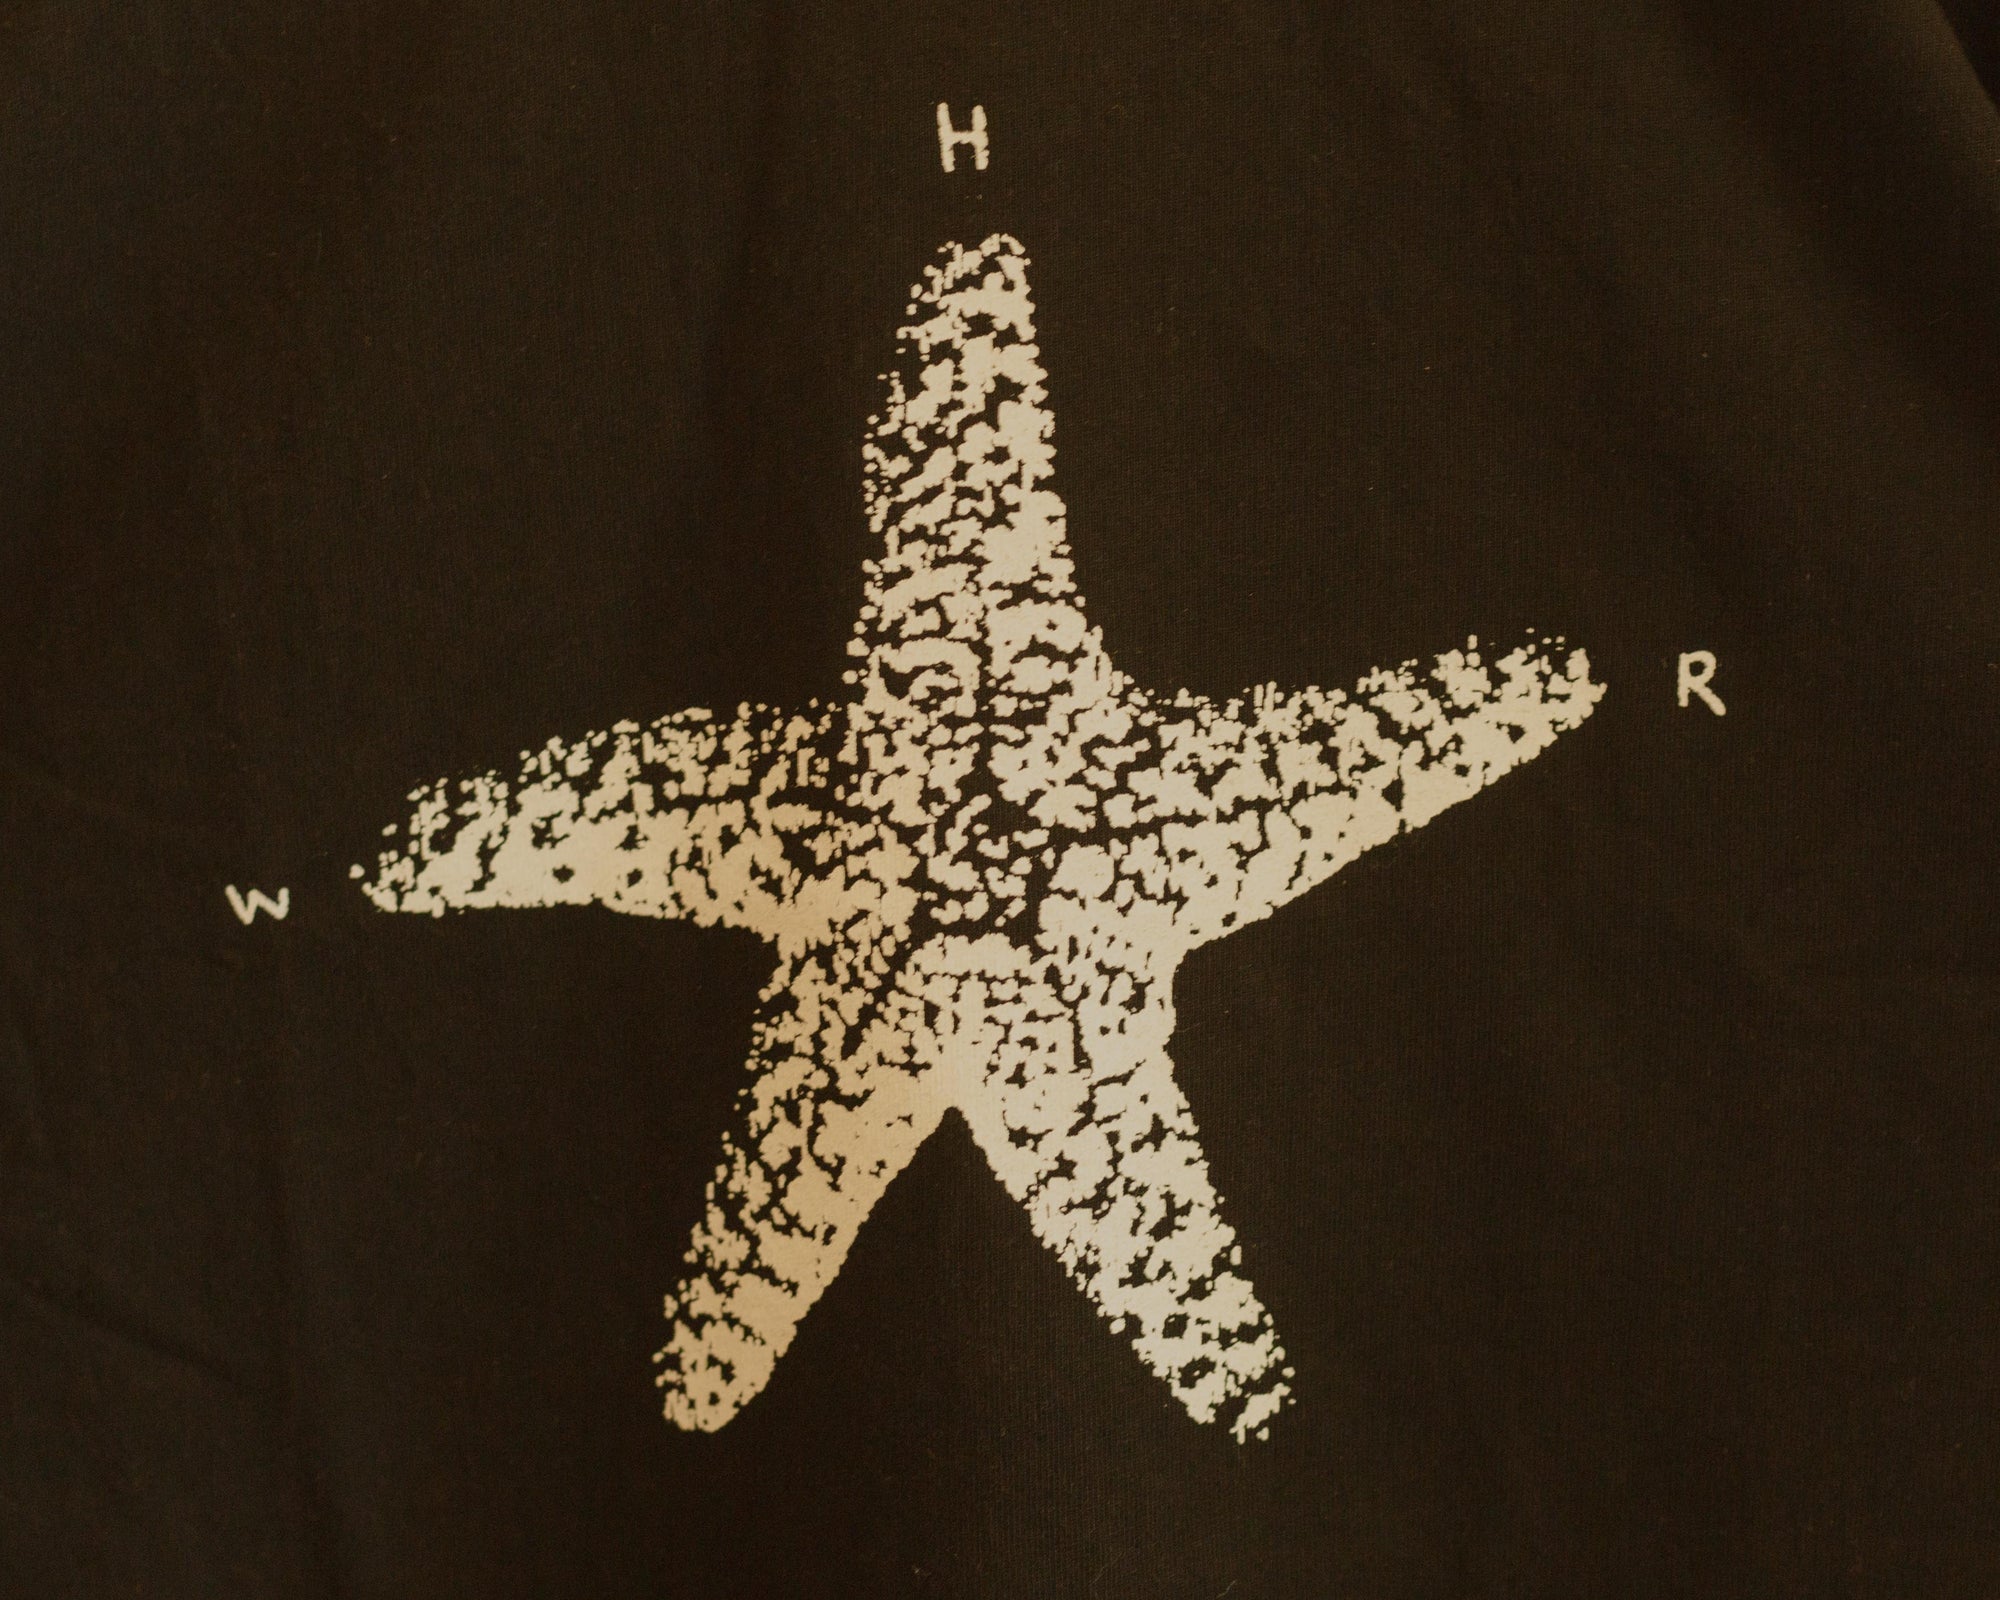 Western Hydrodynamic Research - Starfish Tee graphic close up